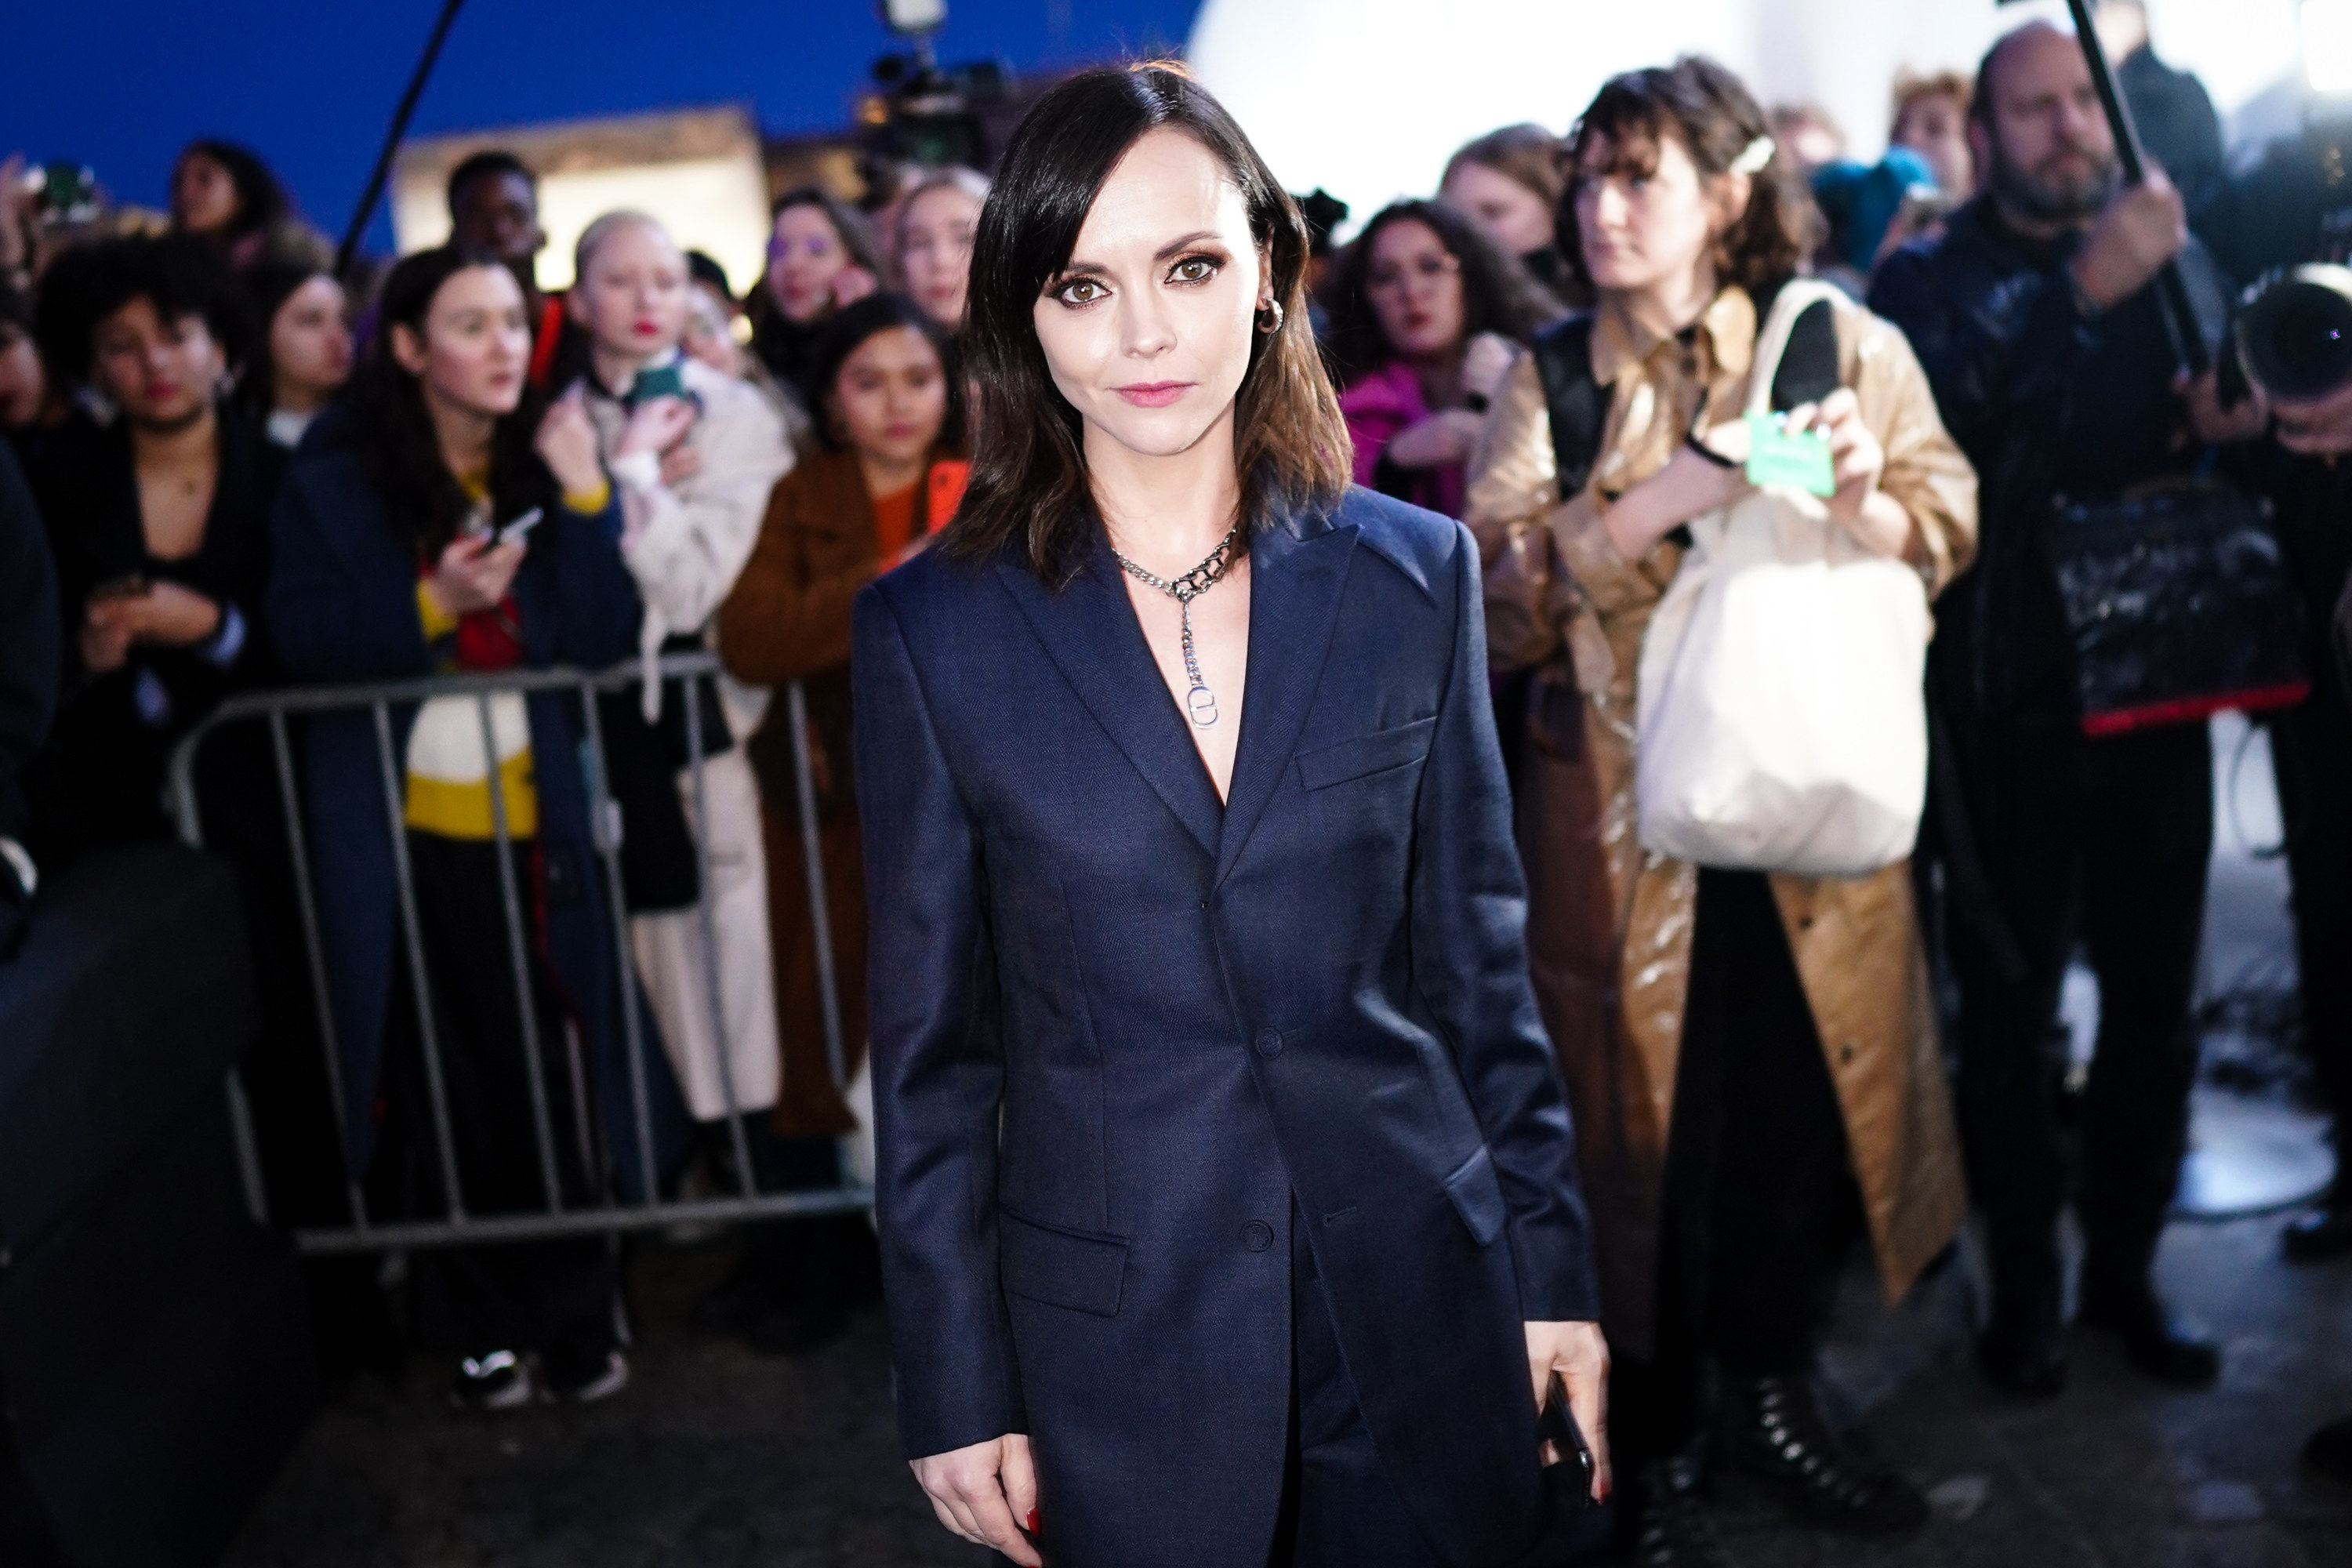 Christina wearing a pantsuit at an event as fans stand behind a barricade behind her